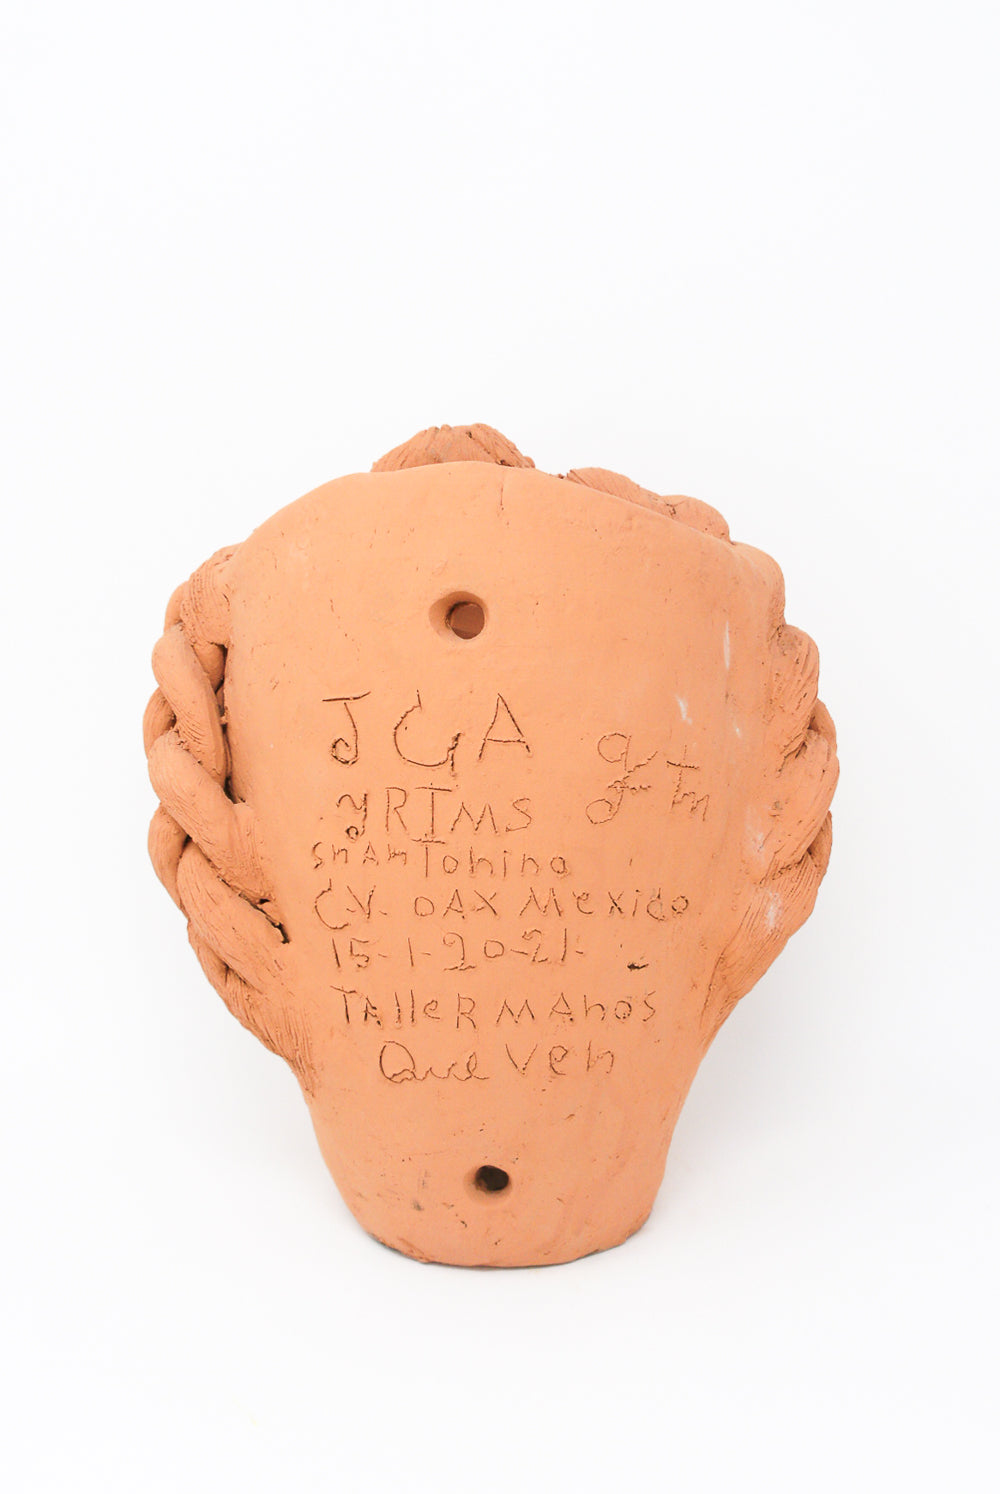 Large Head Planter in Terracotta with braided detail and inscriptions, possibly a traditional craft from Oaxaca, Mexico by Travel Find.